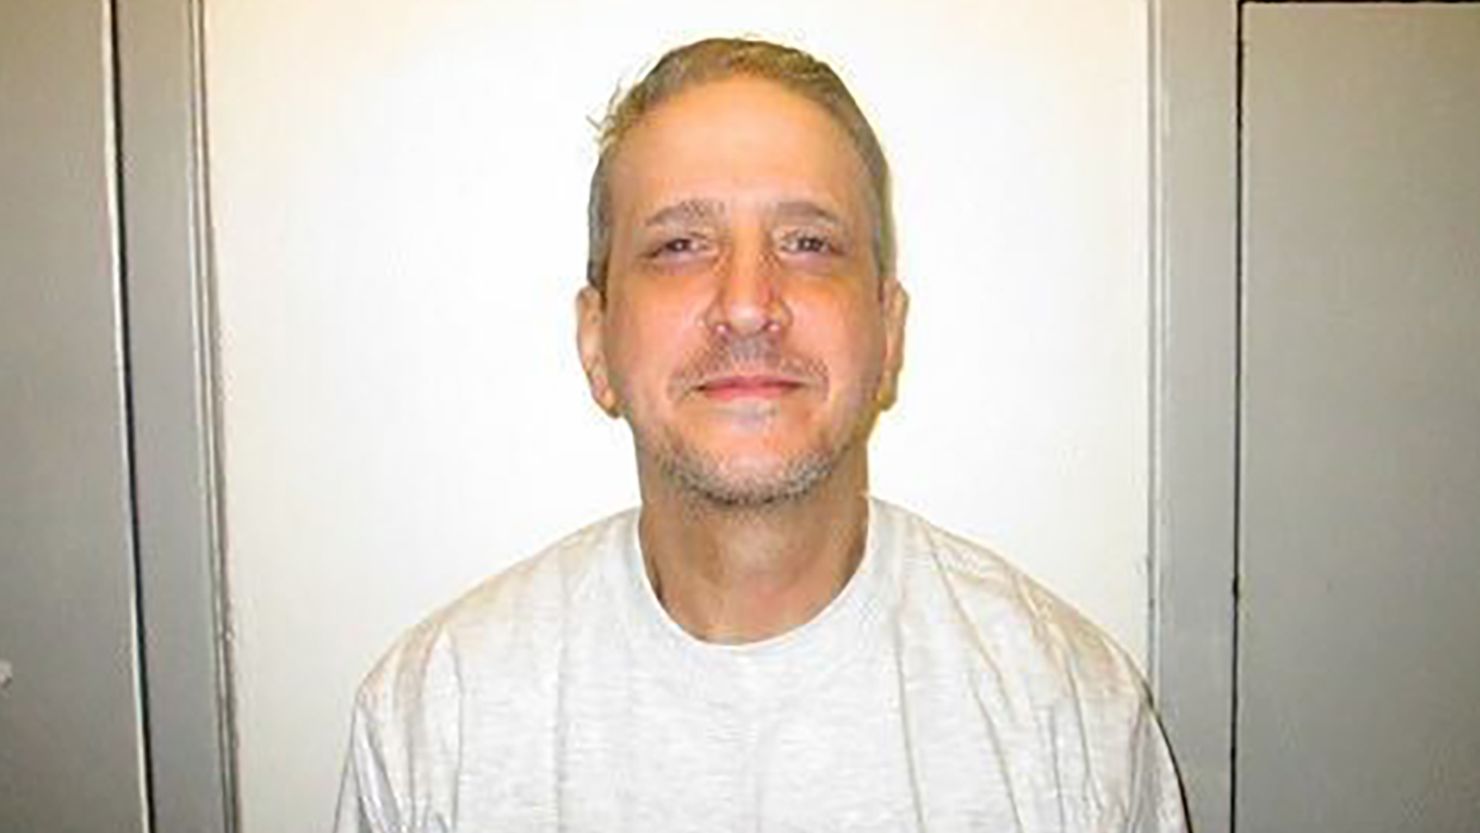 Richard Glossip, 60, has insisted he was not involved in the killing of his boss and has narrowly avoided death three times, as previous execution dates ended with reprieves or stays of execution.